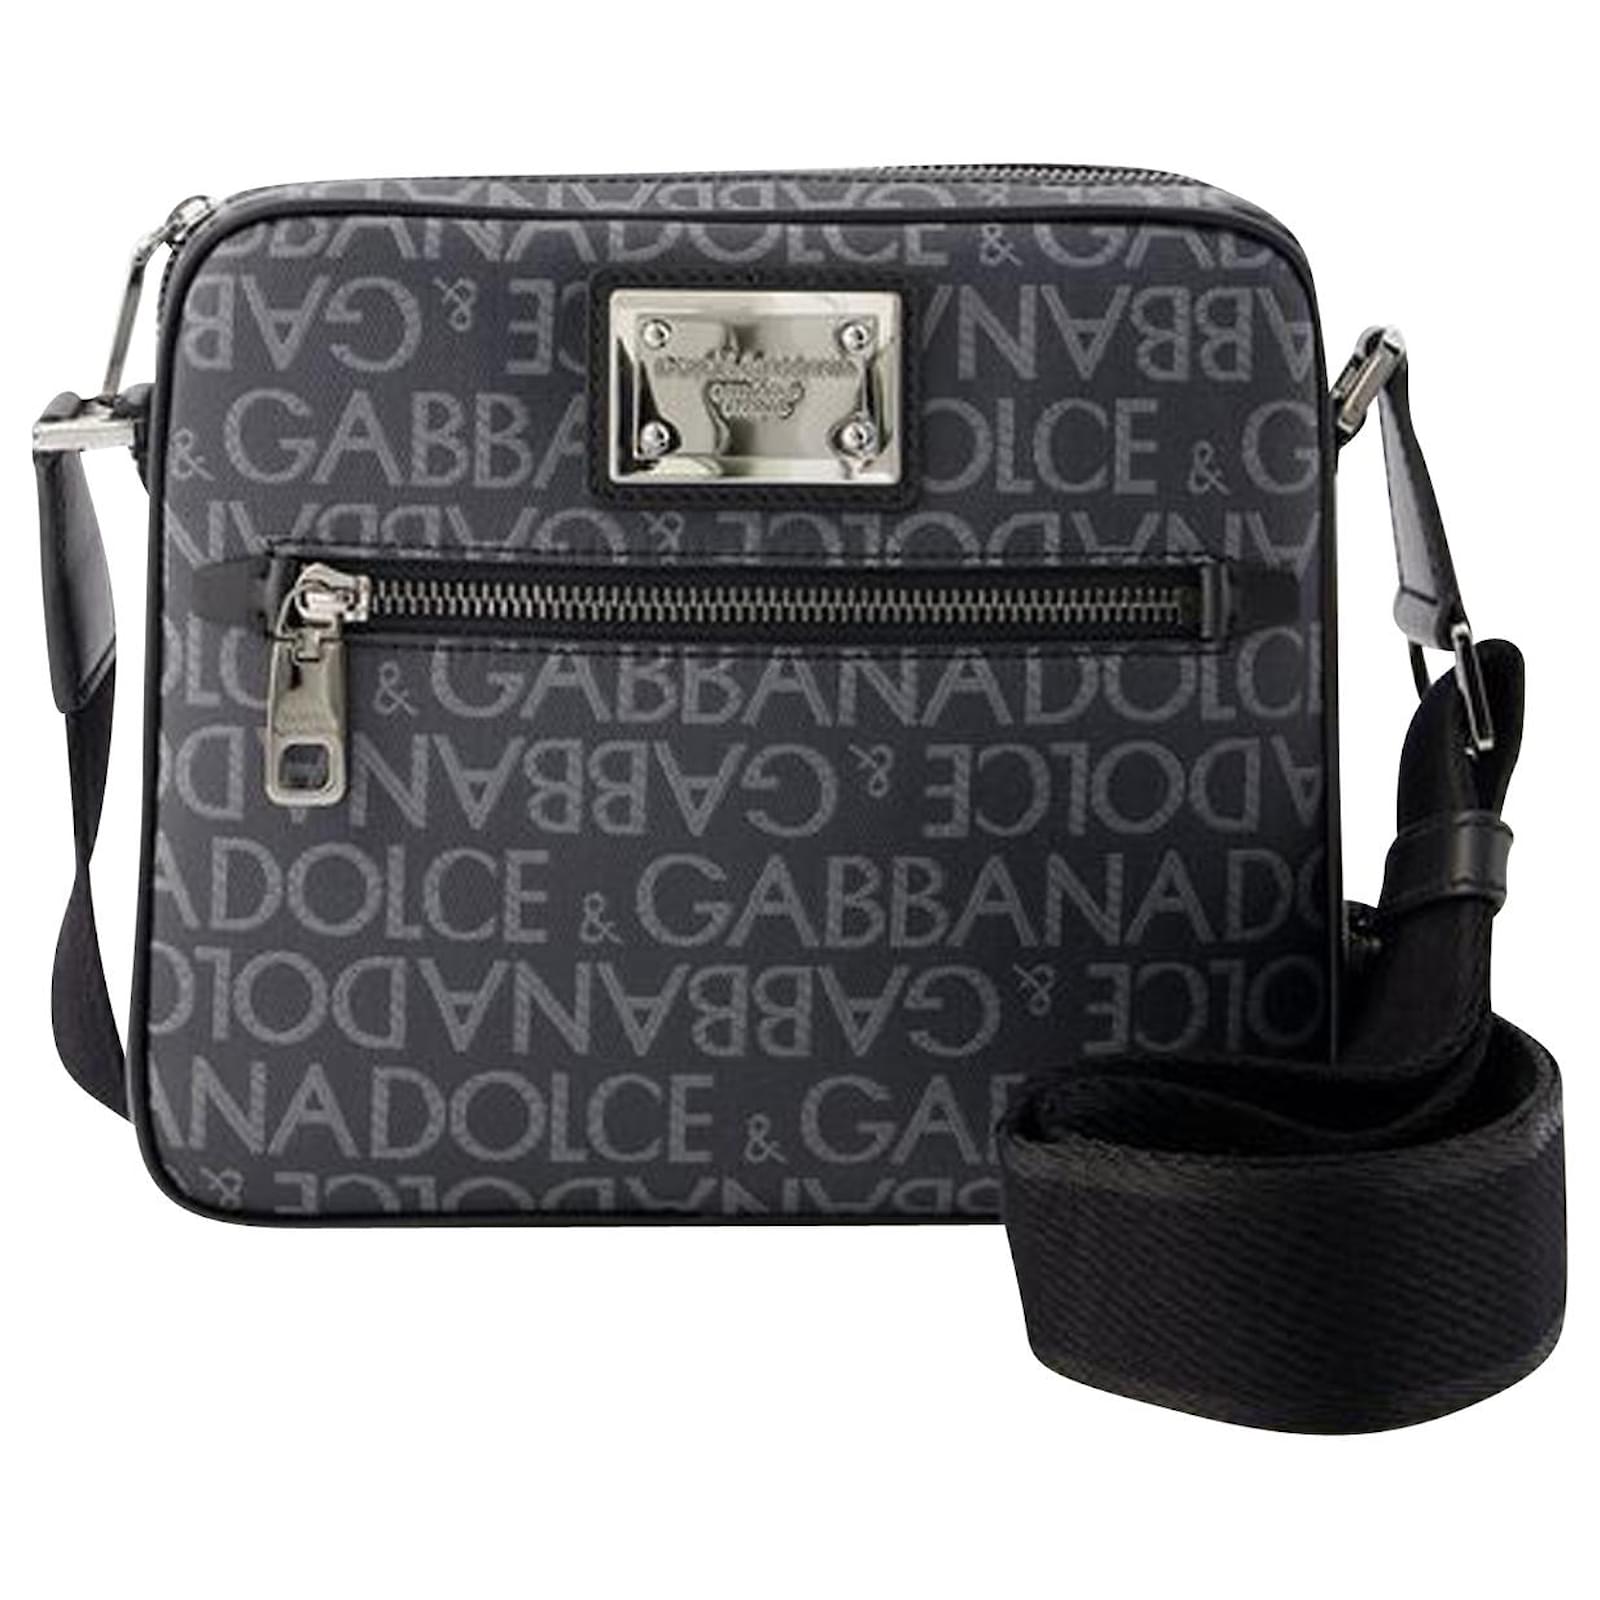 Leather Pouch in Black - Dolce Gabbana